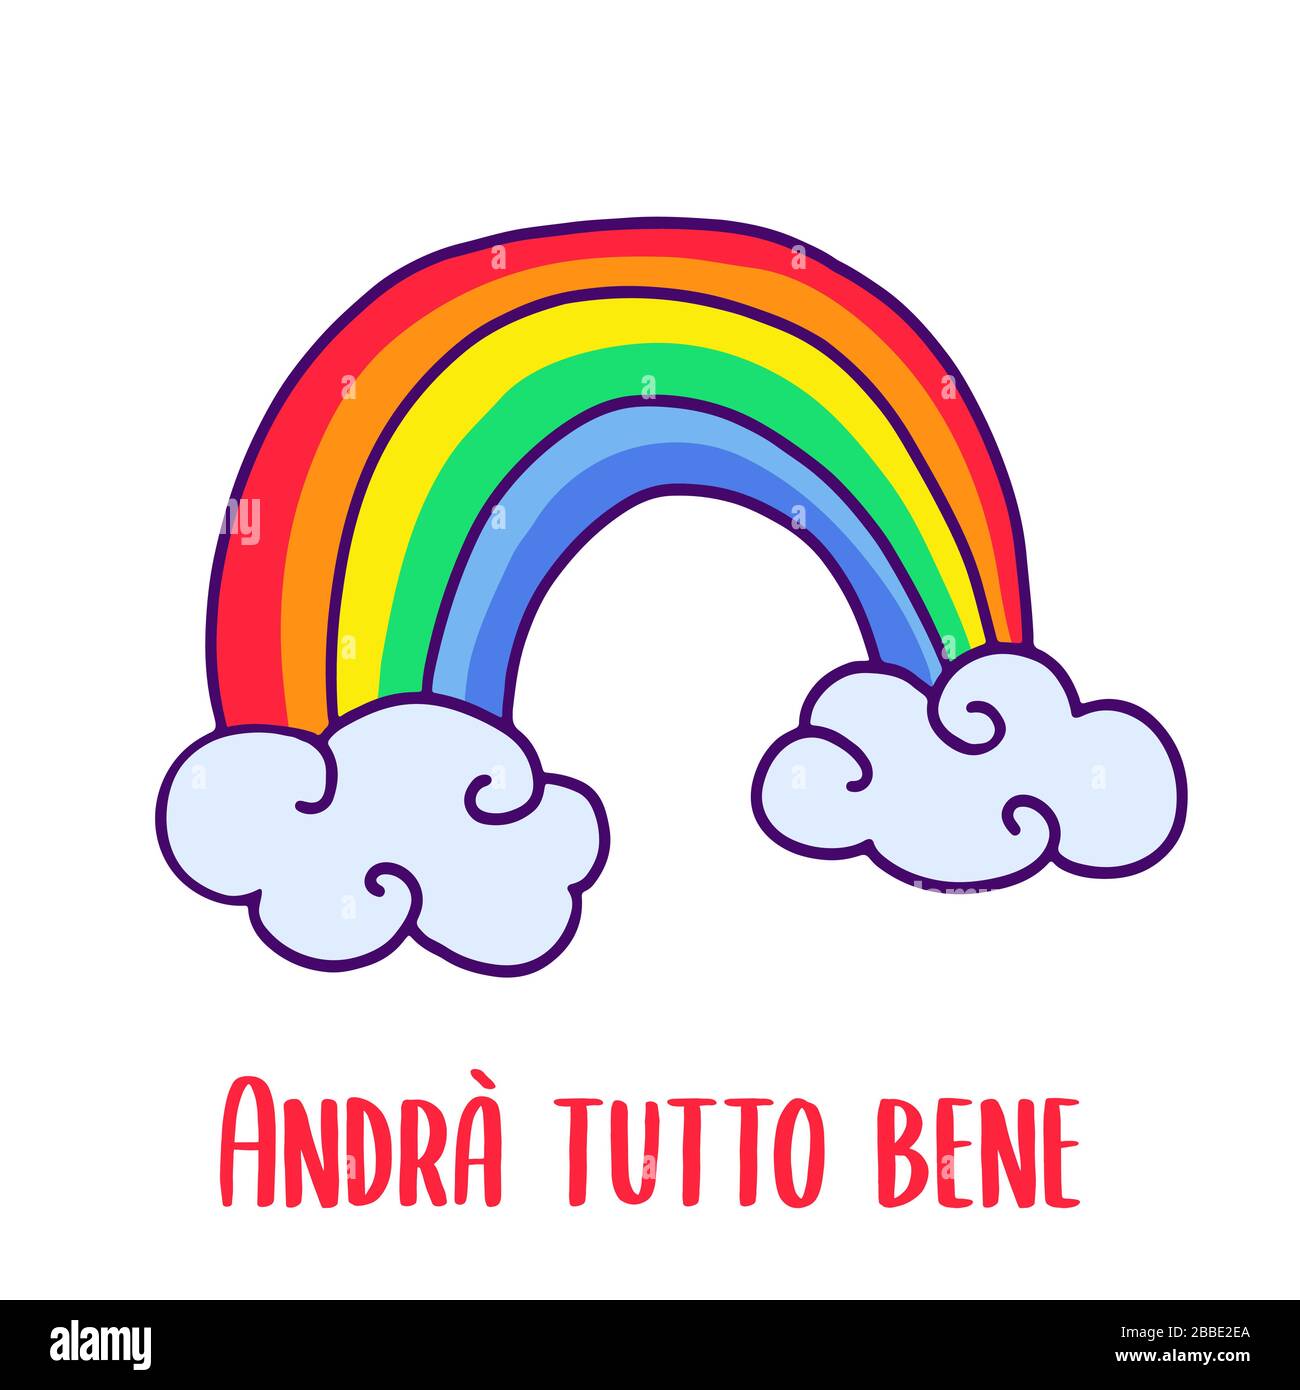 Everything will be ok written in Italian - Andra tutto bene. Simple Rainbow and clouds doodle icon. Hope symbol in coronavirus pandemic. Vector illustration. Stock Vector